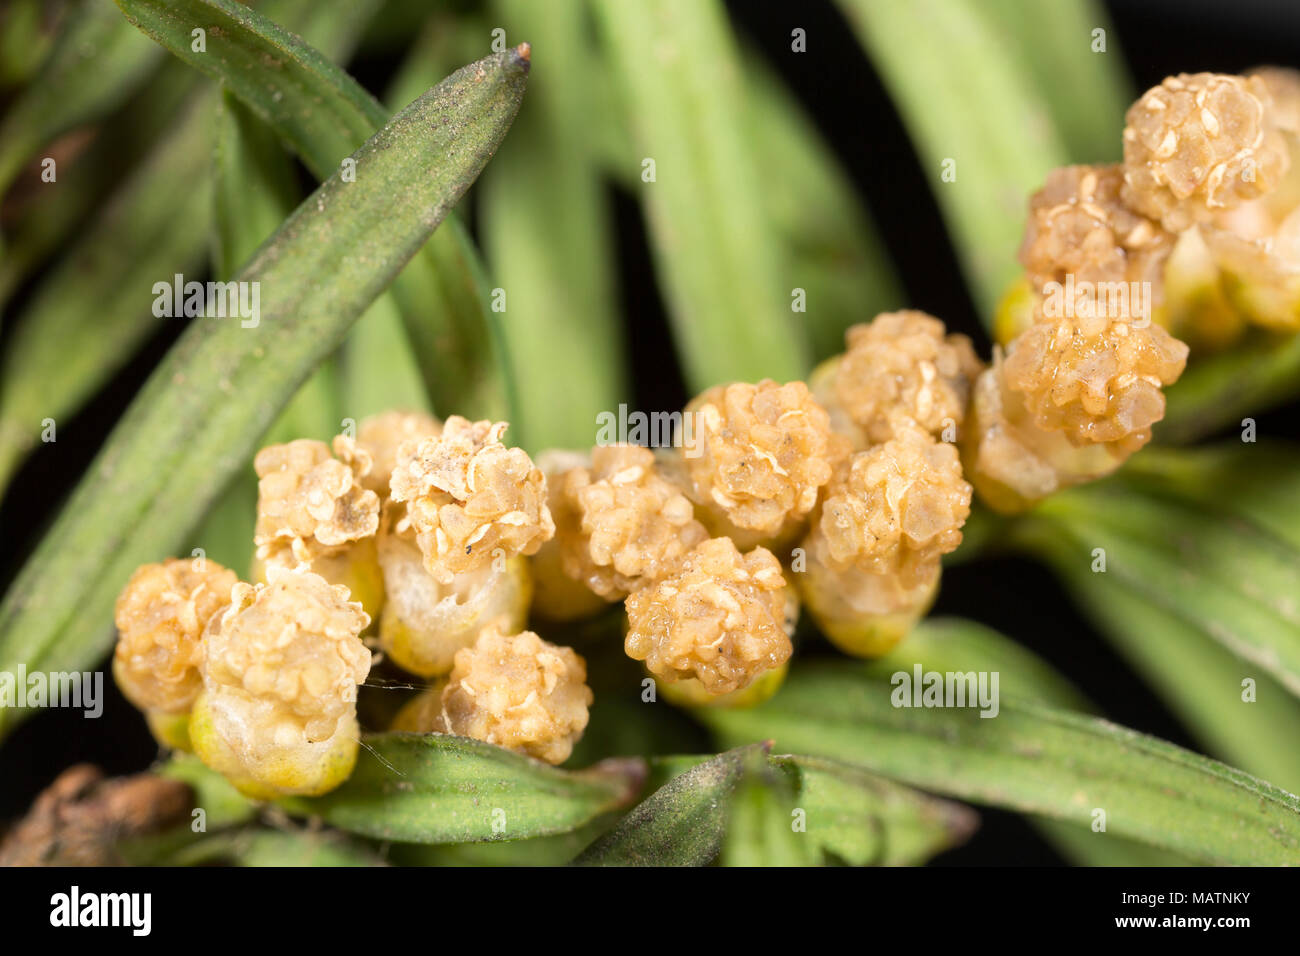 Clusters of male flowers of the common yew tree Taxus baccata, March 2018 Dorset England UK Stock Photo